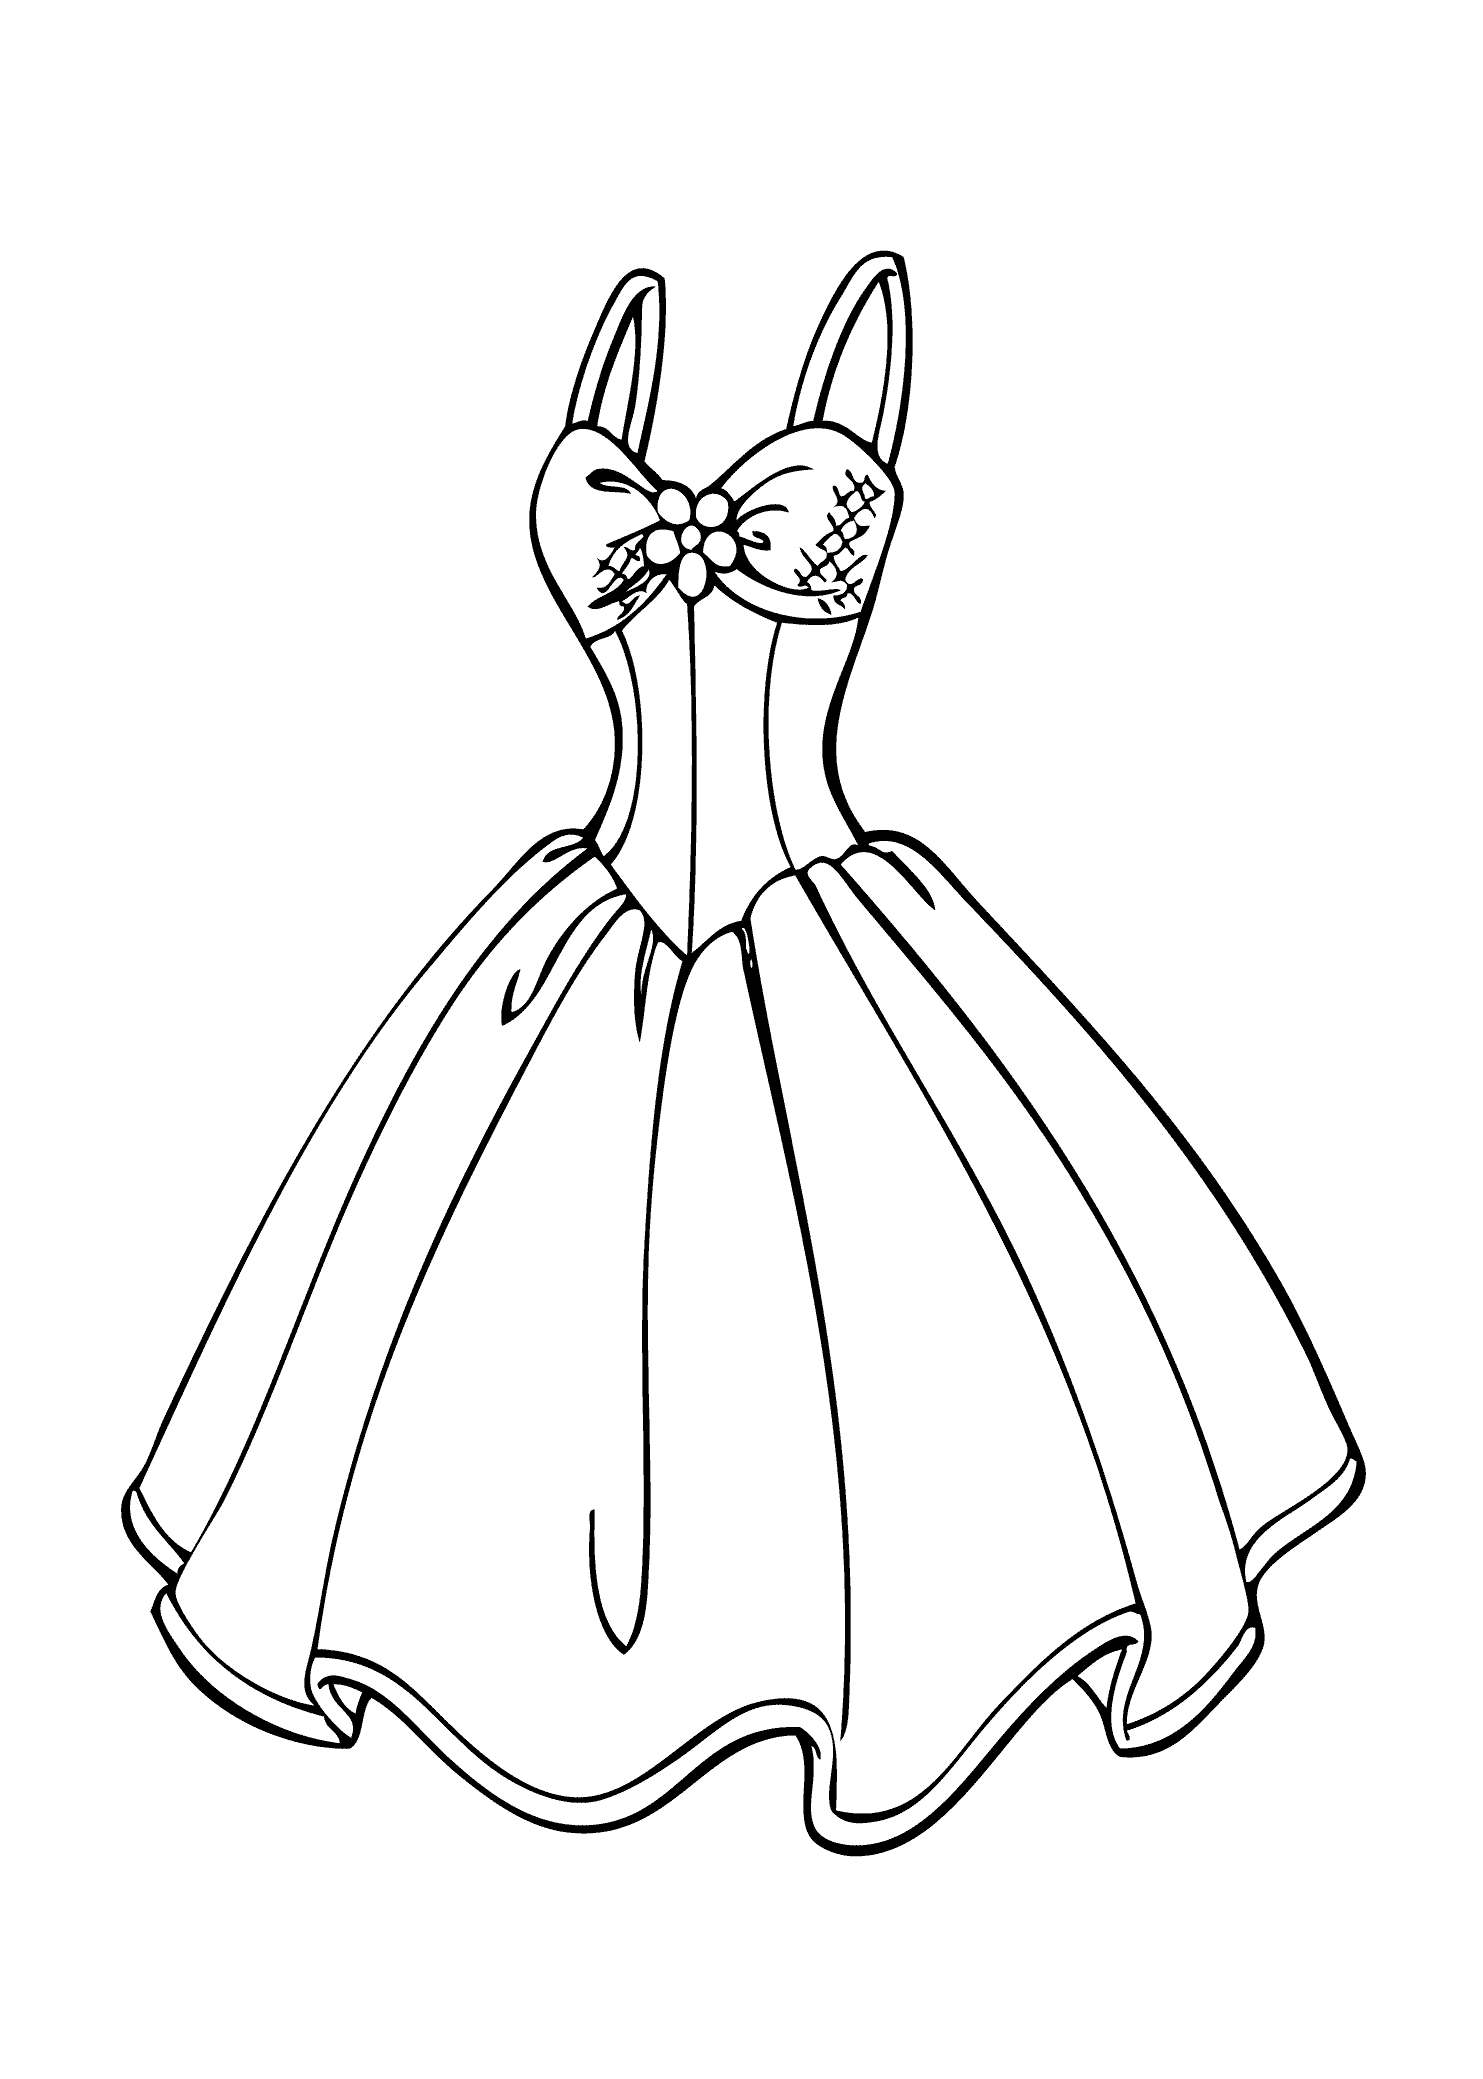 Cinderella Dress Coloring Page - Coloring Pages For All Ages